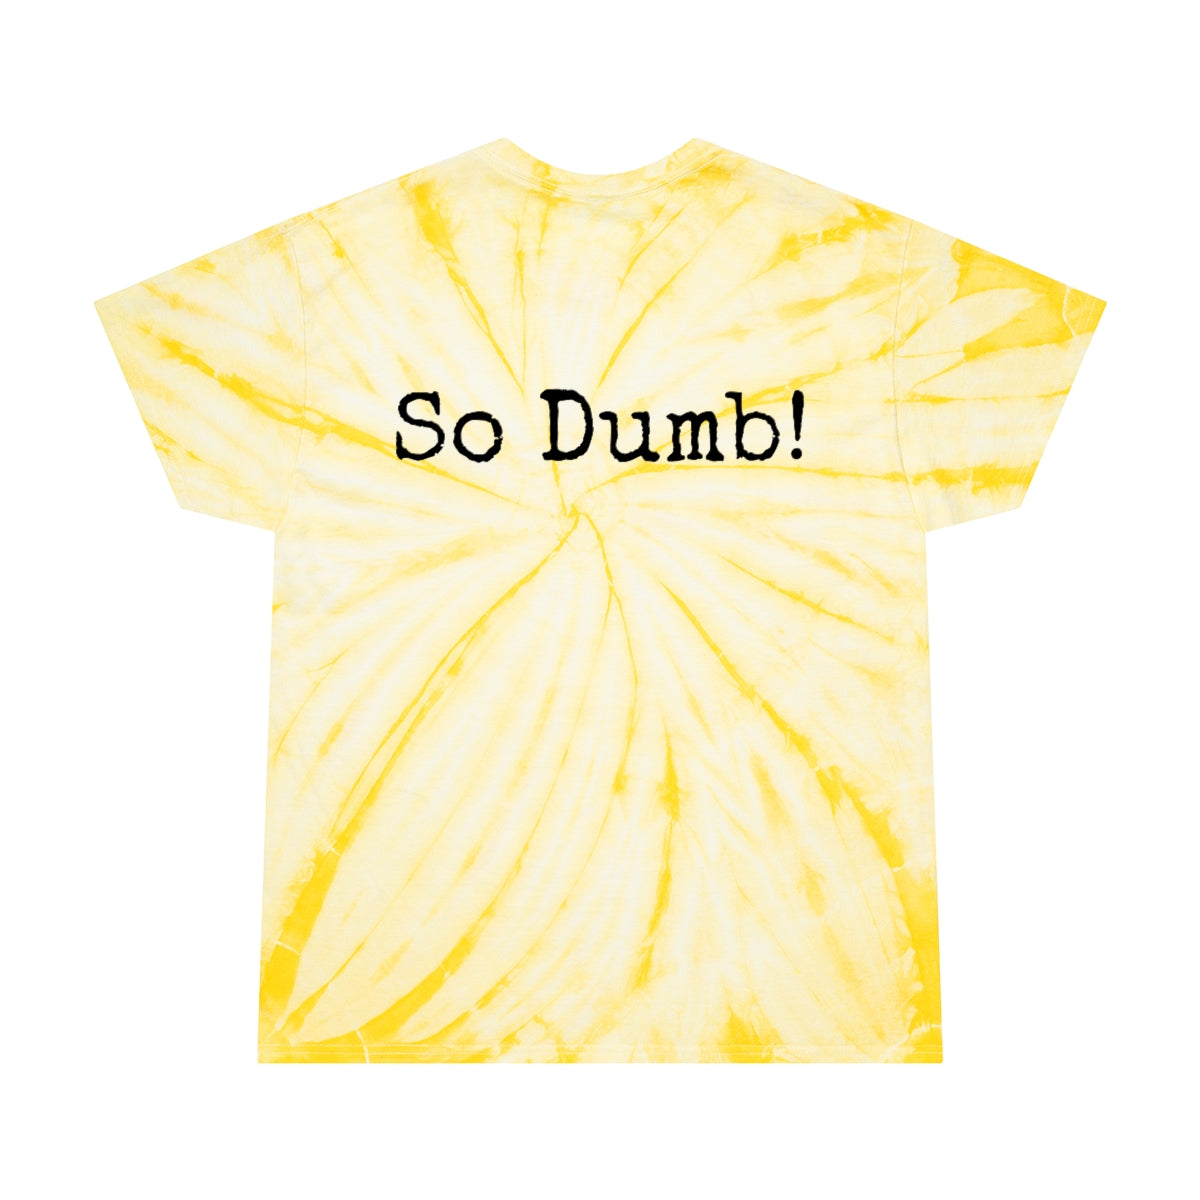 Tie-Dye Tee, Cyclone T Shirt tshirt Anti Cancer Cancer is Dumb Survivor Support Humorous Funny